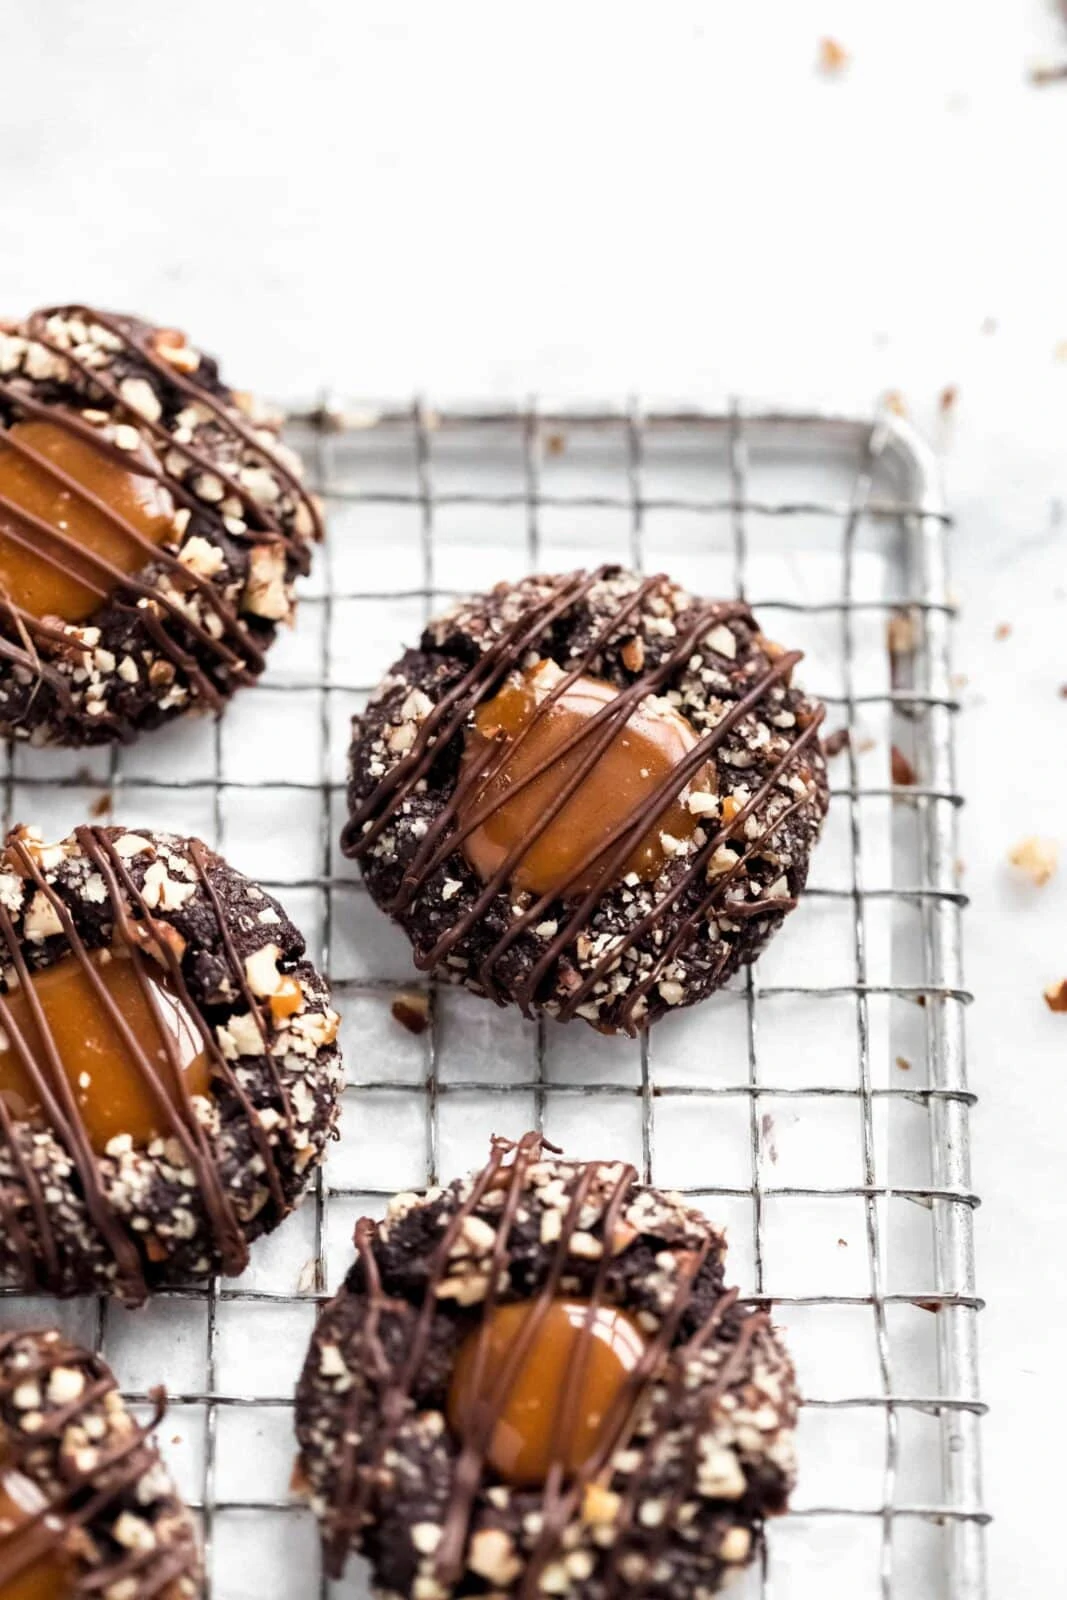 These turtle thumbprint cookies complete with a gooey caramel center and pecan coating. Try not to eat five?